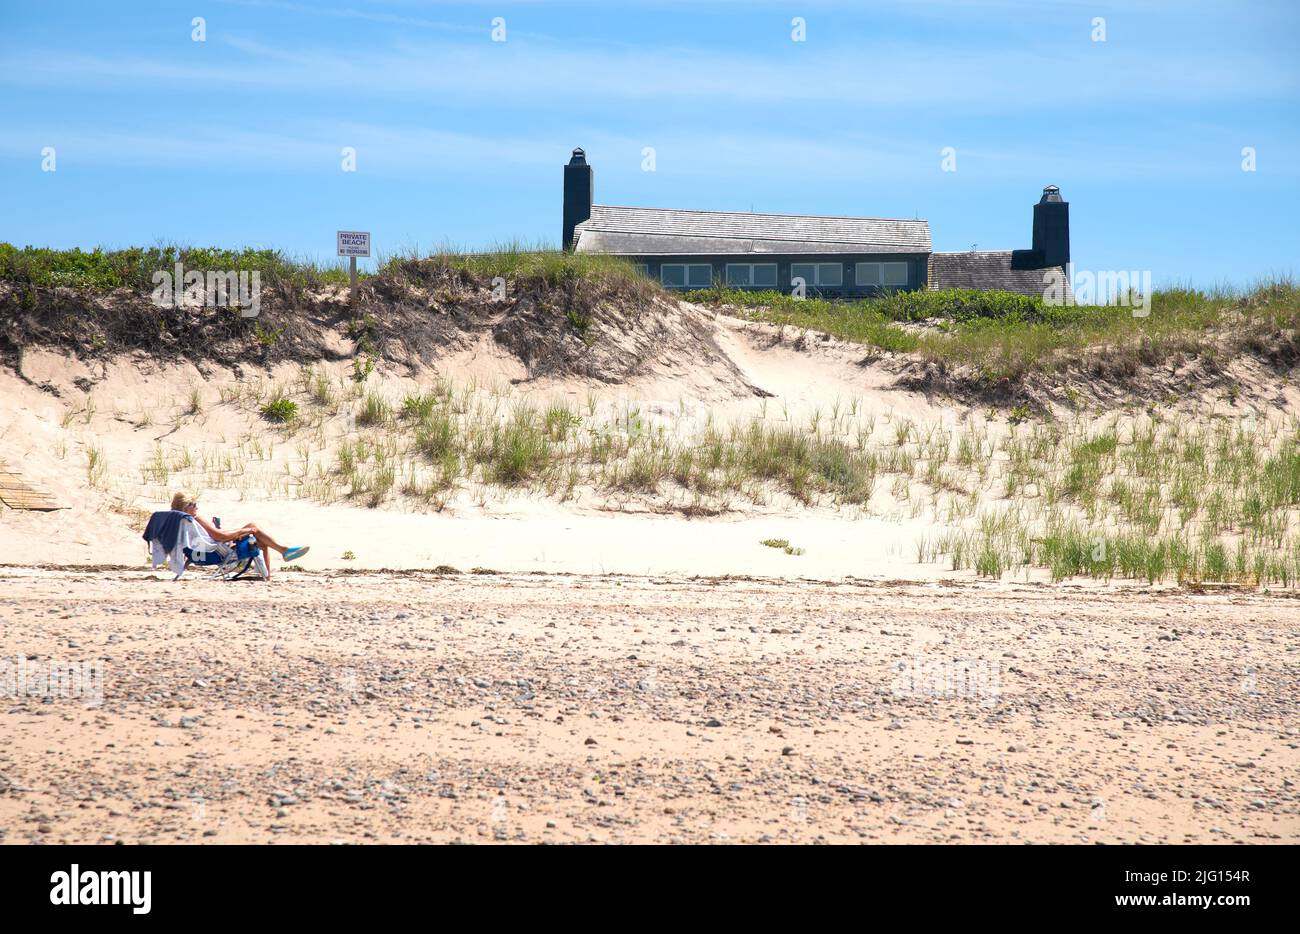 On the beach sunning in front of summer home.  Dennis, MA (Cape Cod) USA Stock Photo